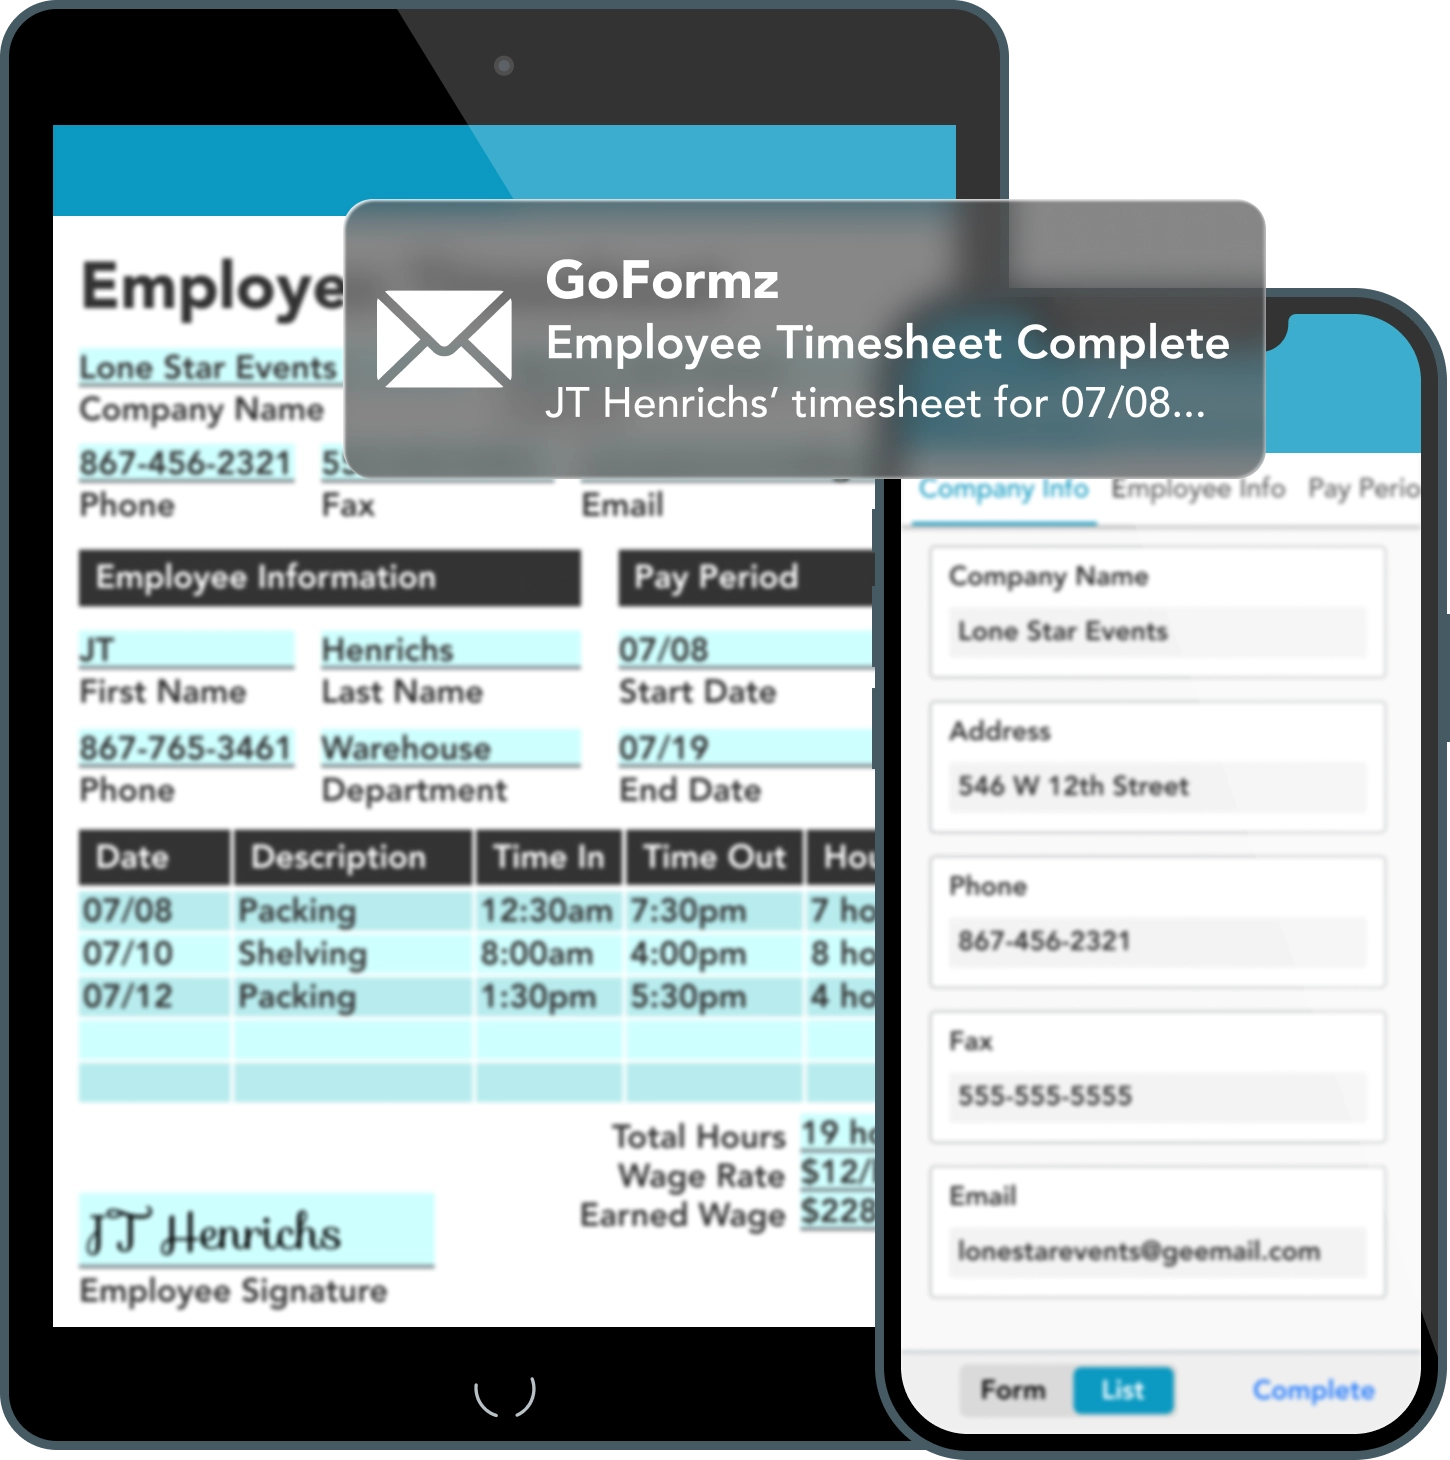 Digitize any paper form with GoFormz.